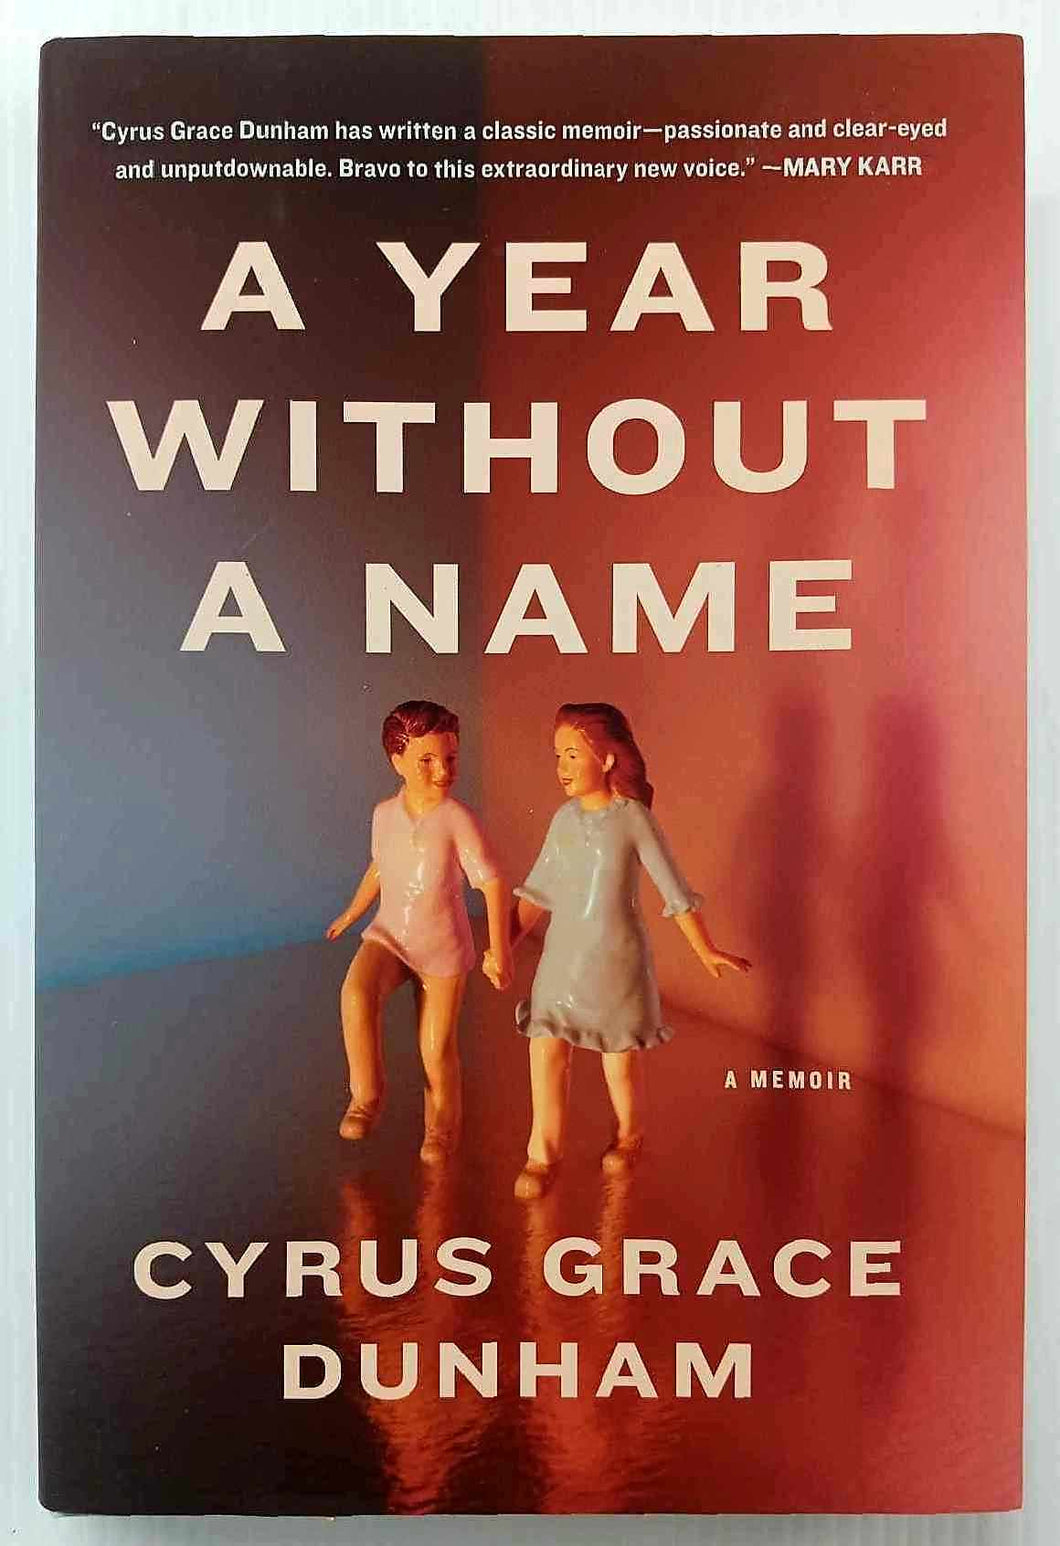 A YEAR WITHOUT A NAME - Cyrus Grace Dunham